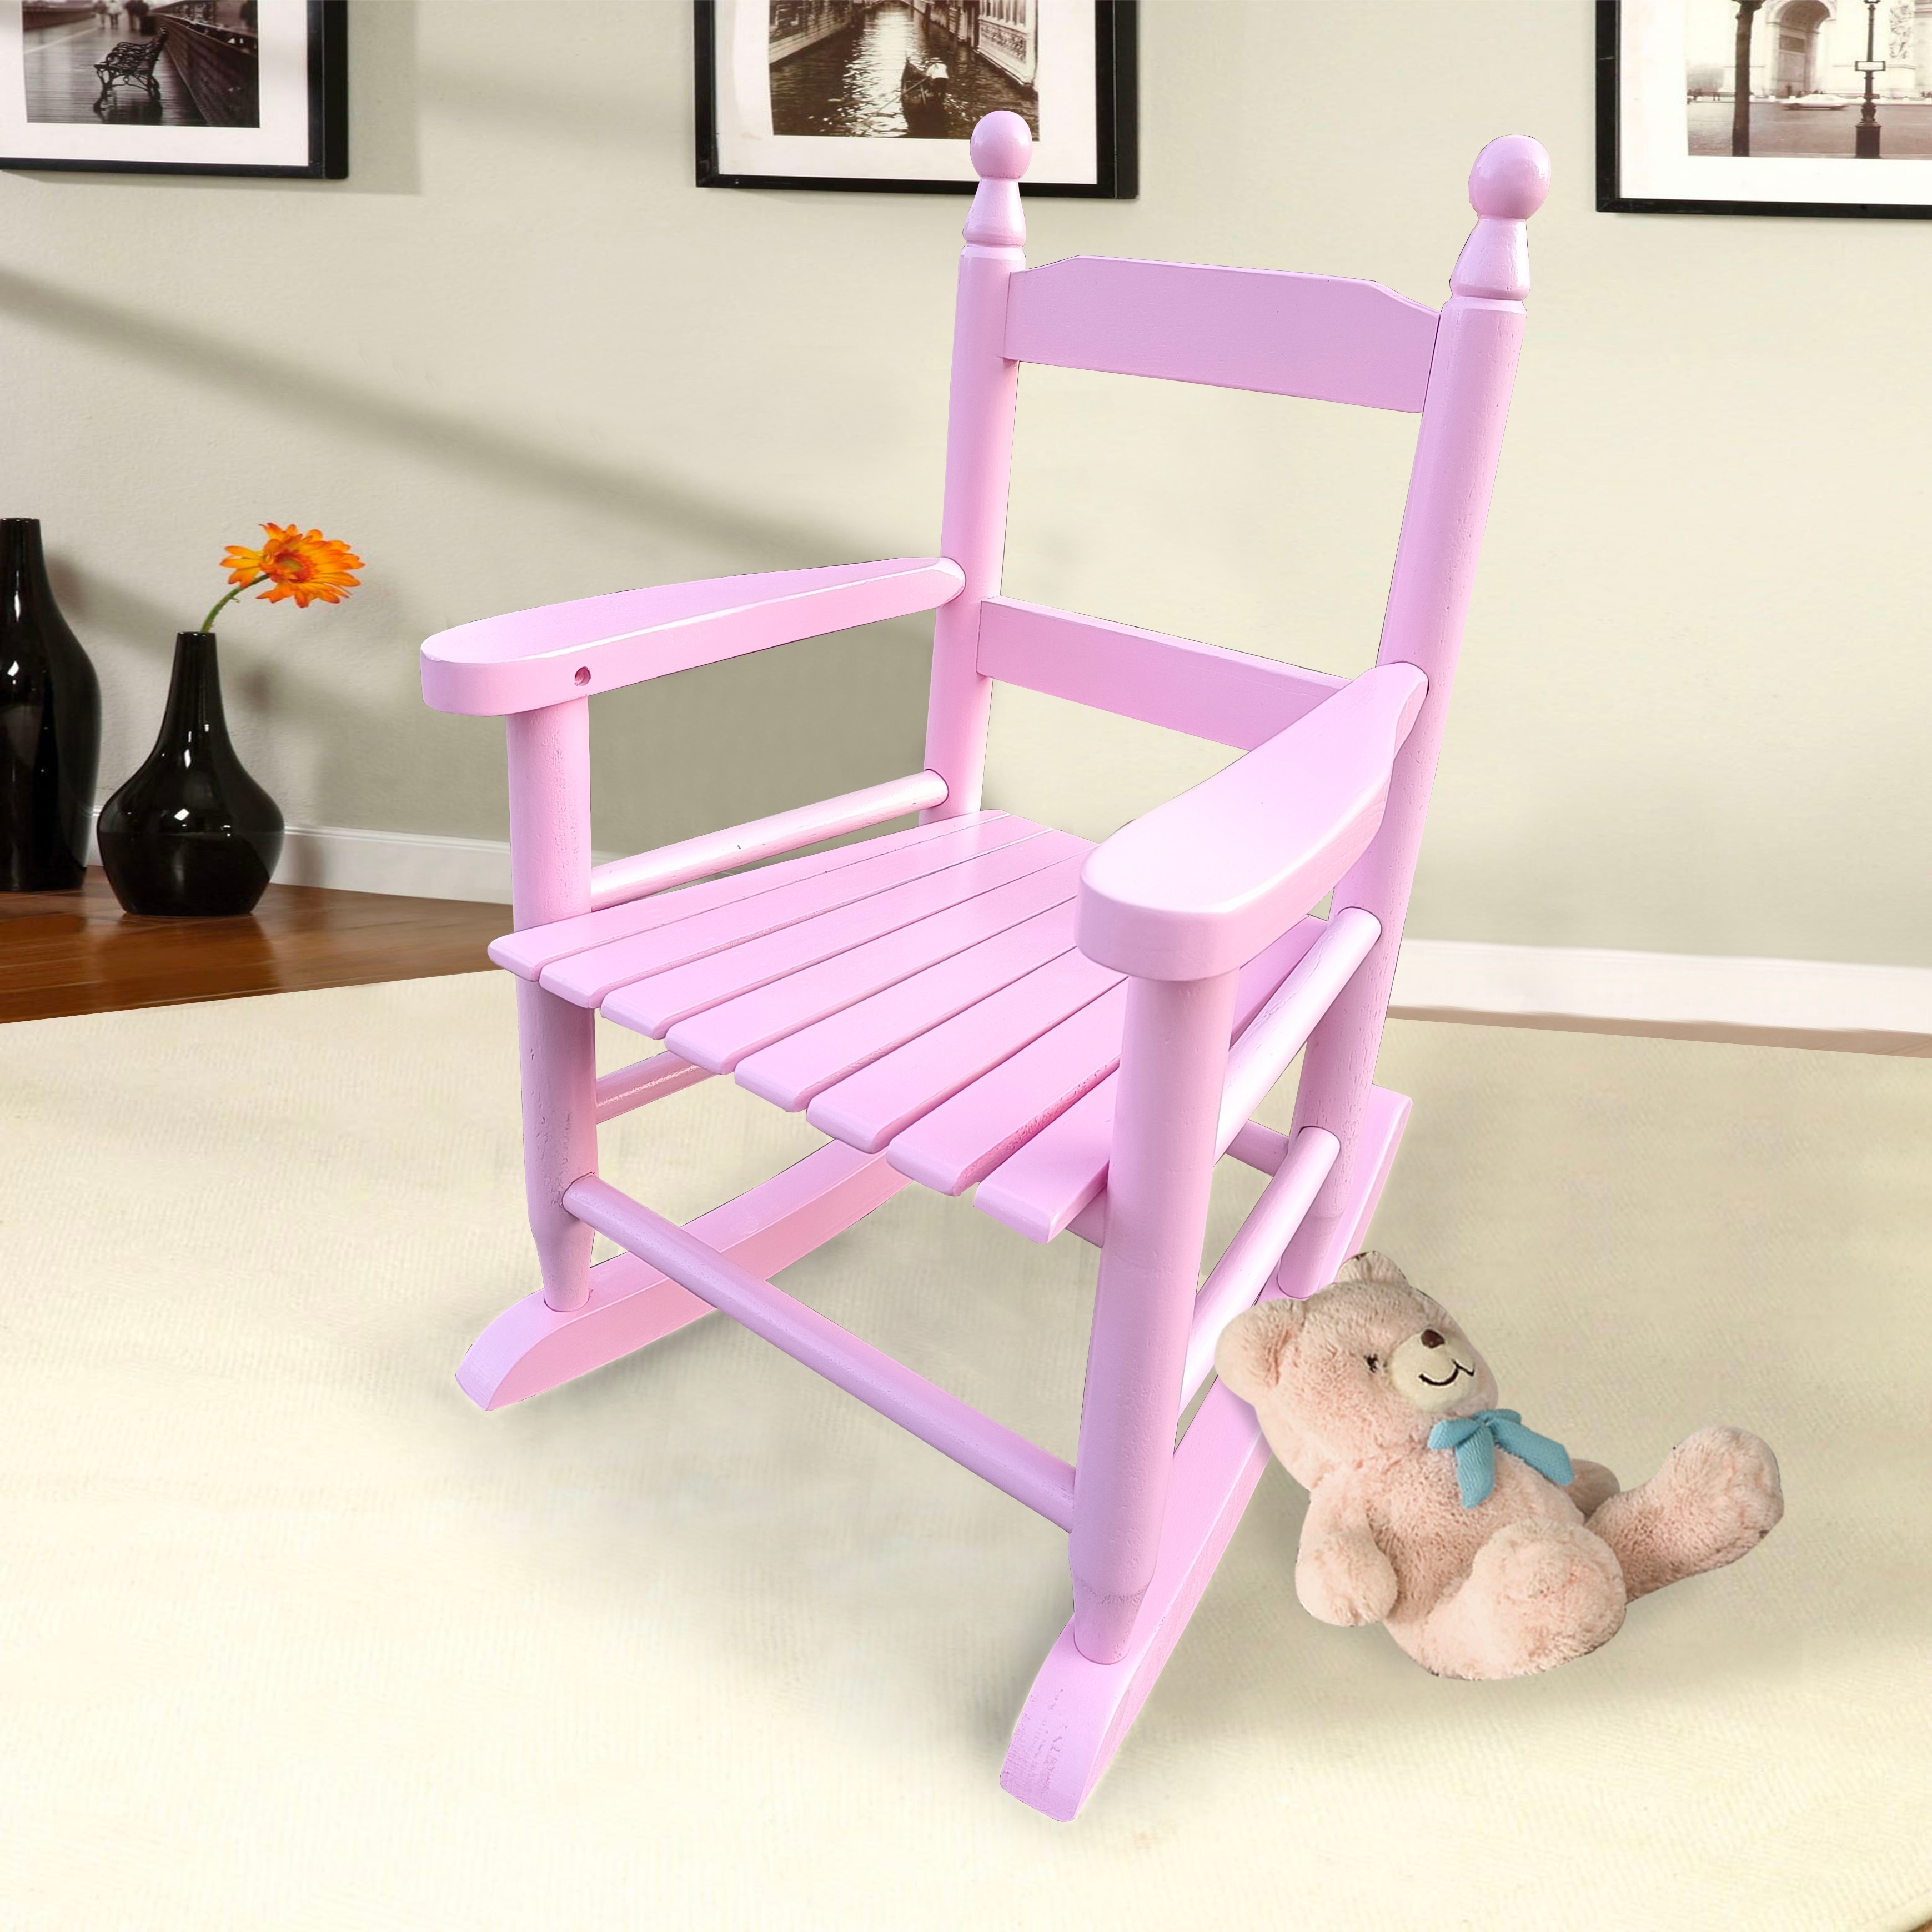 Childrens Rocking Chair With Ergonomic Seat  All-weather Durable Solid Wood  Perfect For Kids.